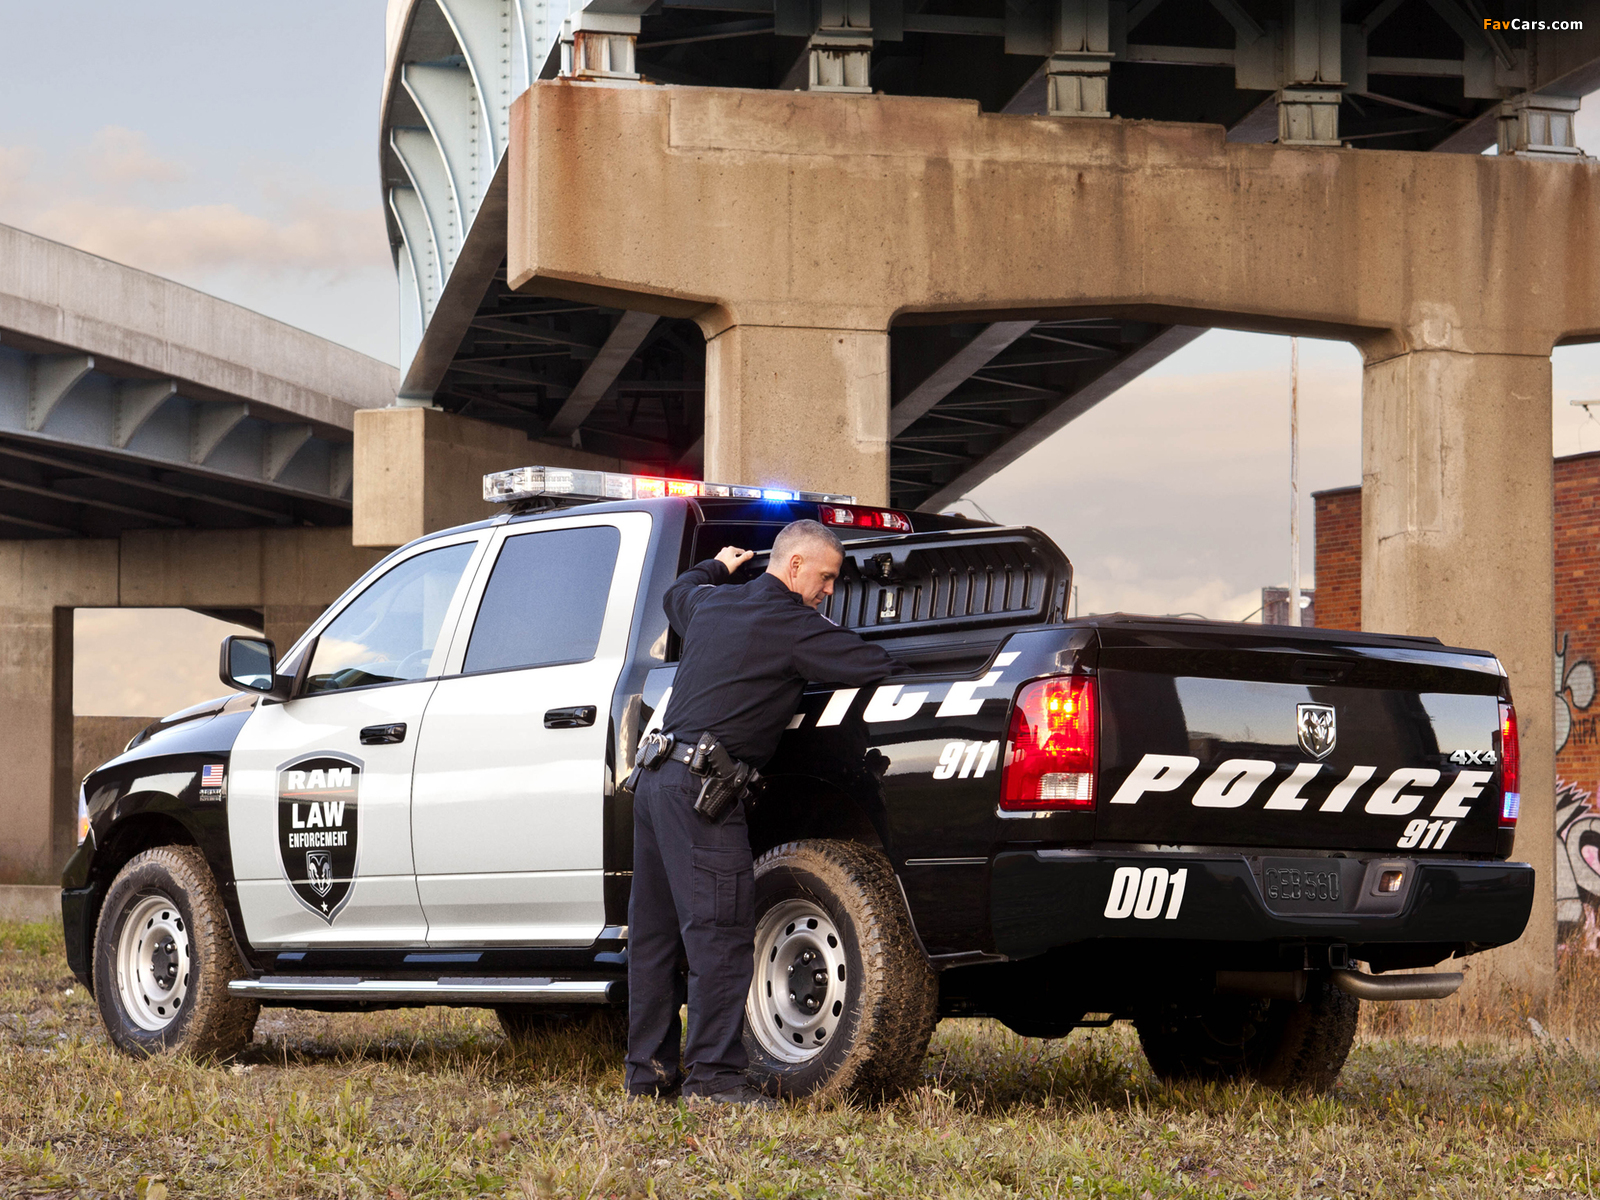 Ram 1500 Crew Cab Special Service Package Police Truck 2011 pictures (1600 x 1200)